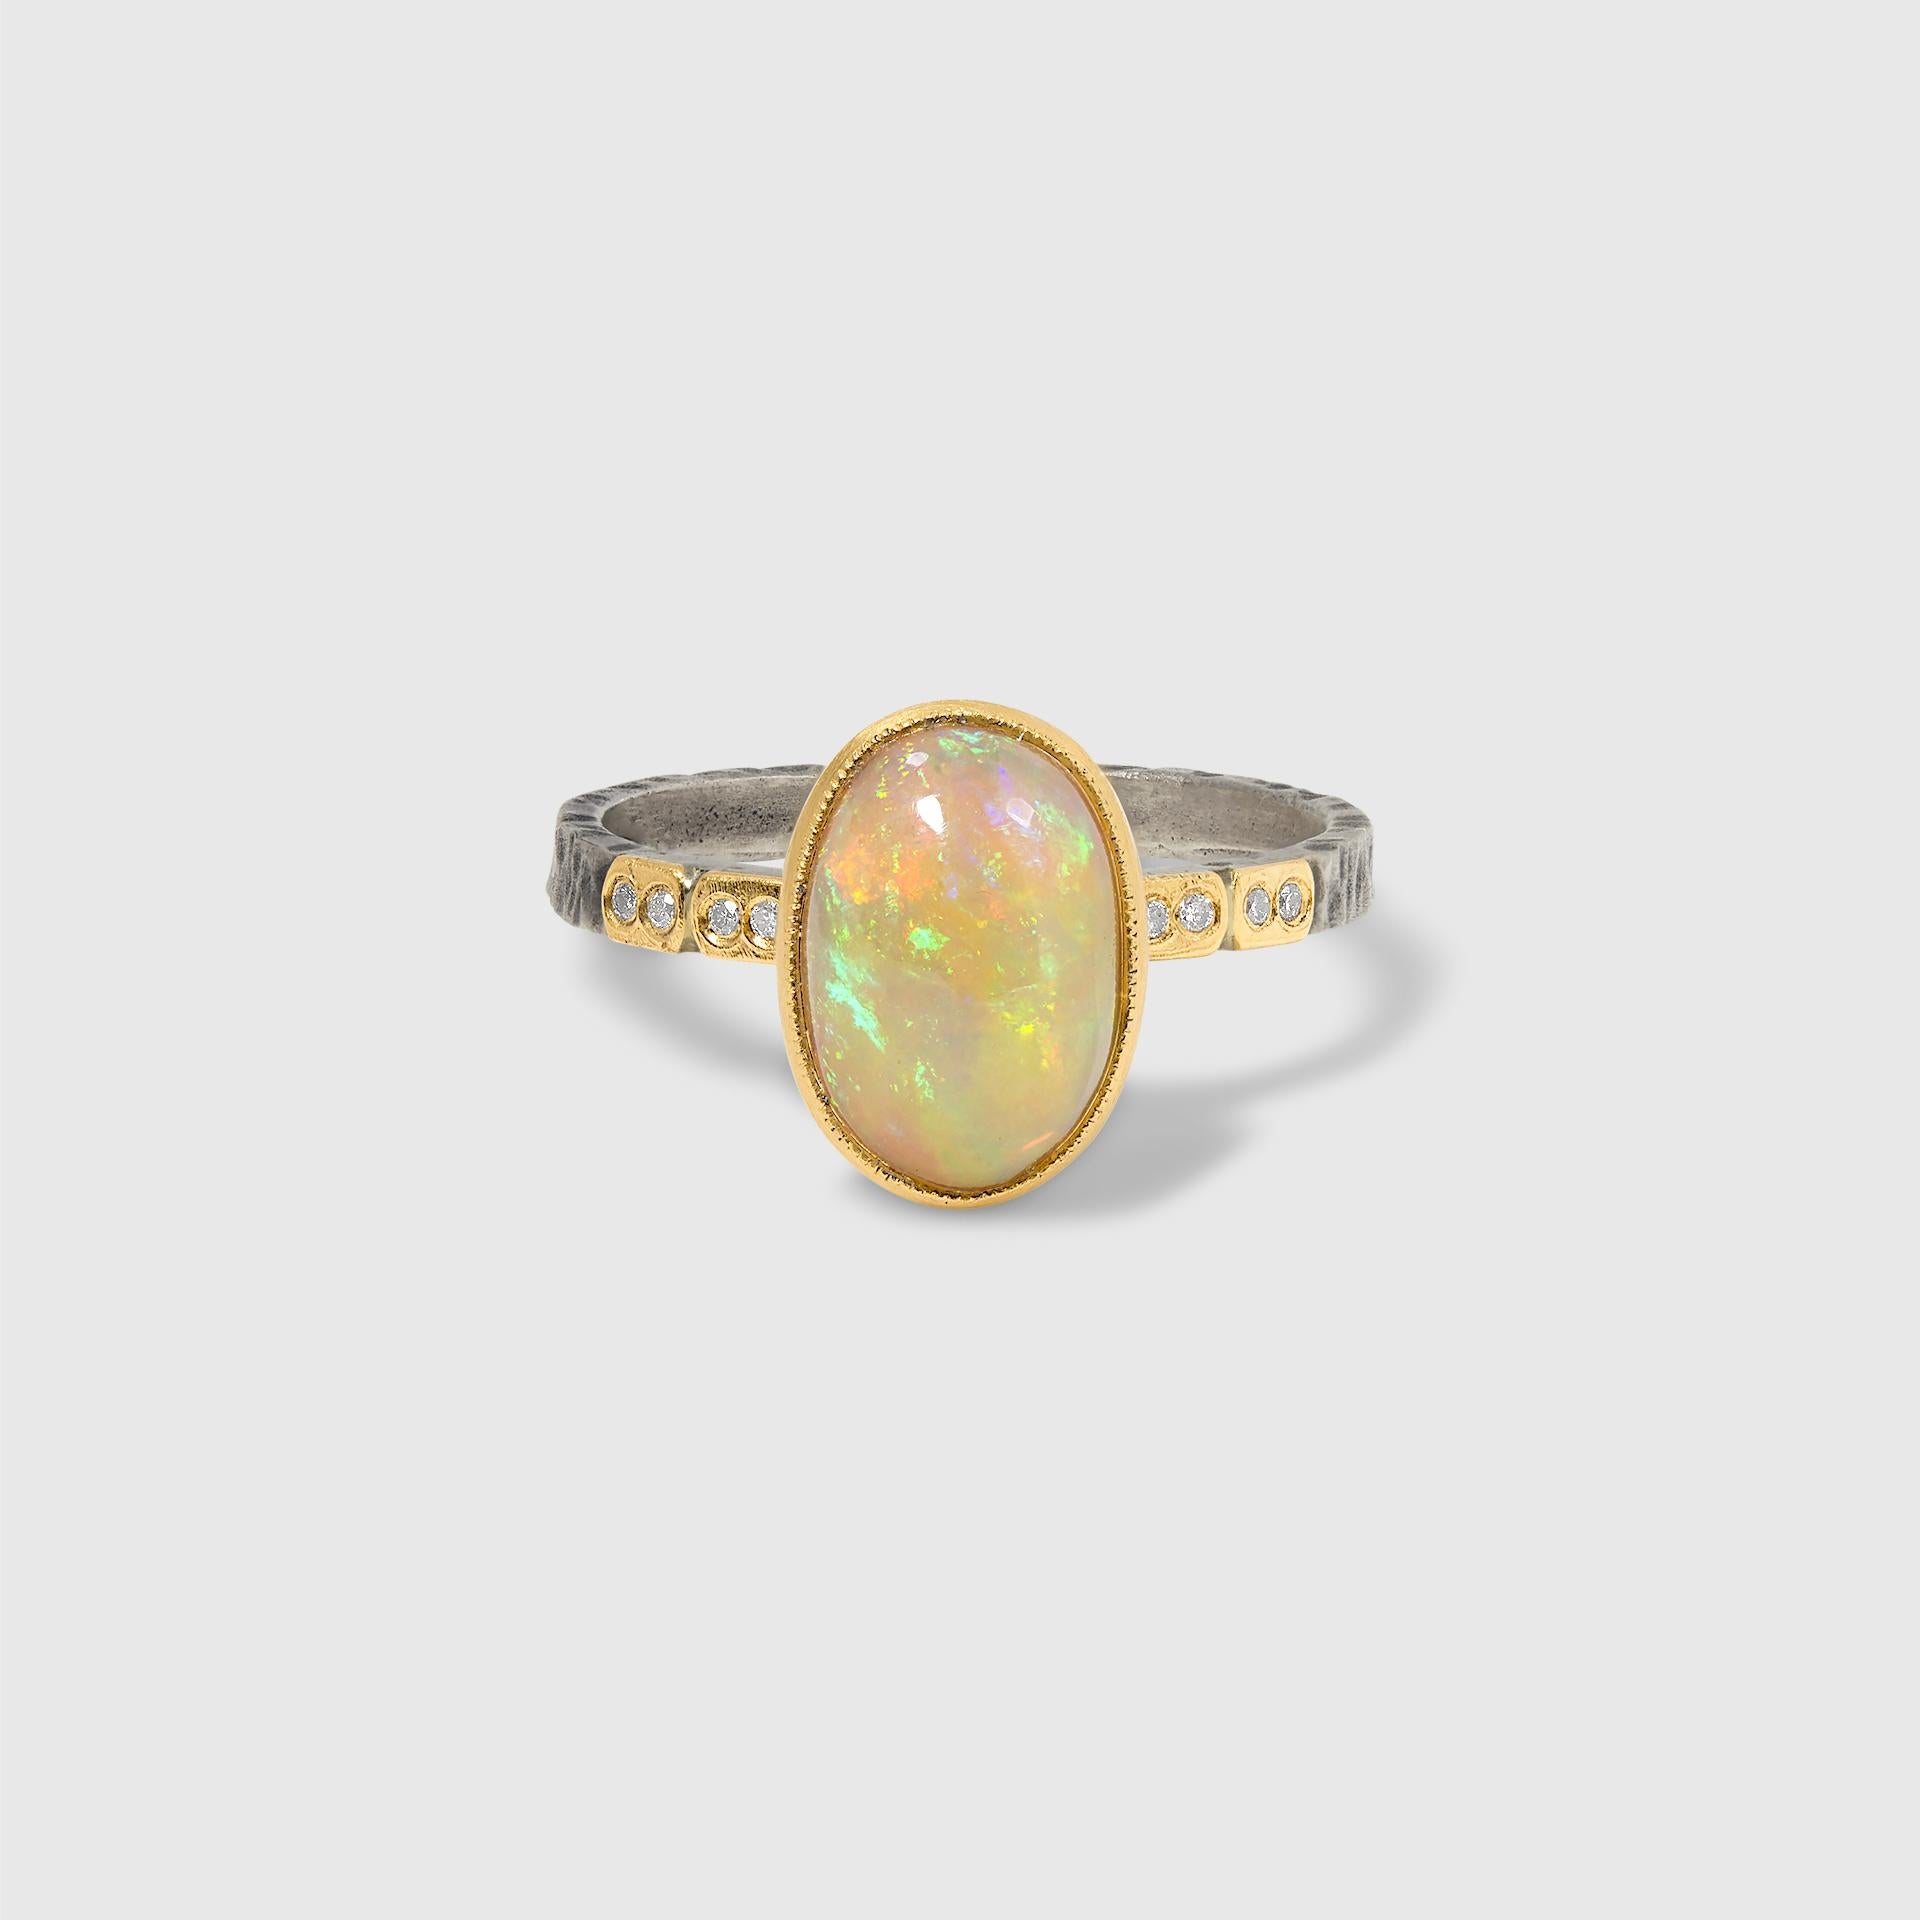 Oval Cut 2.02 Ct Large, Stunning Opal Ring with Diamonds, 24kt Gold and Silver For Sale